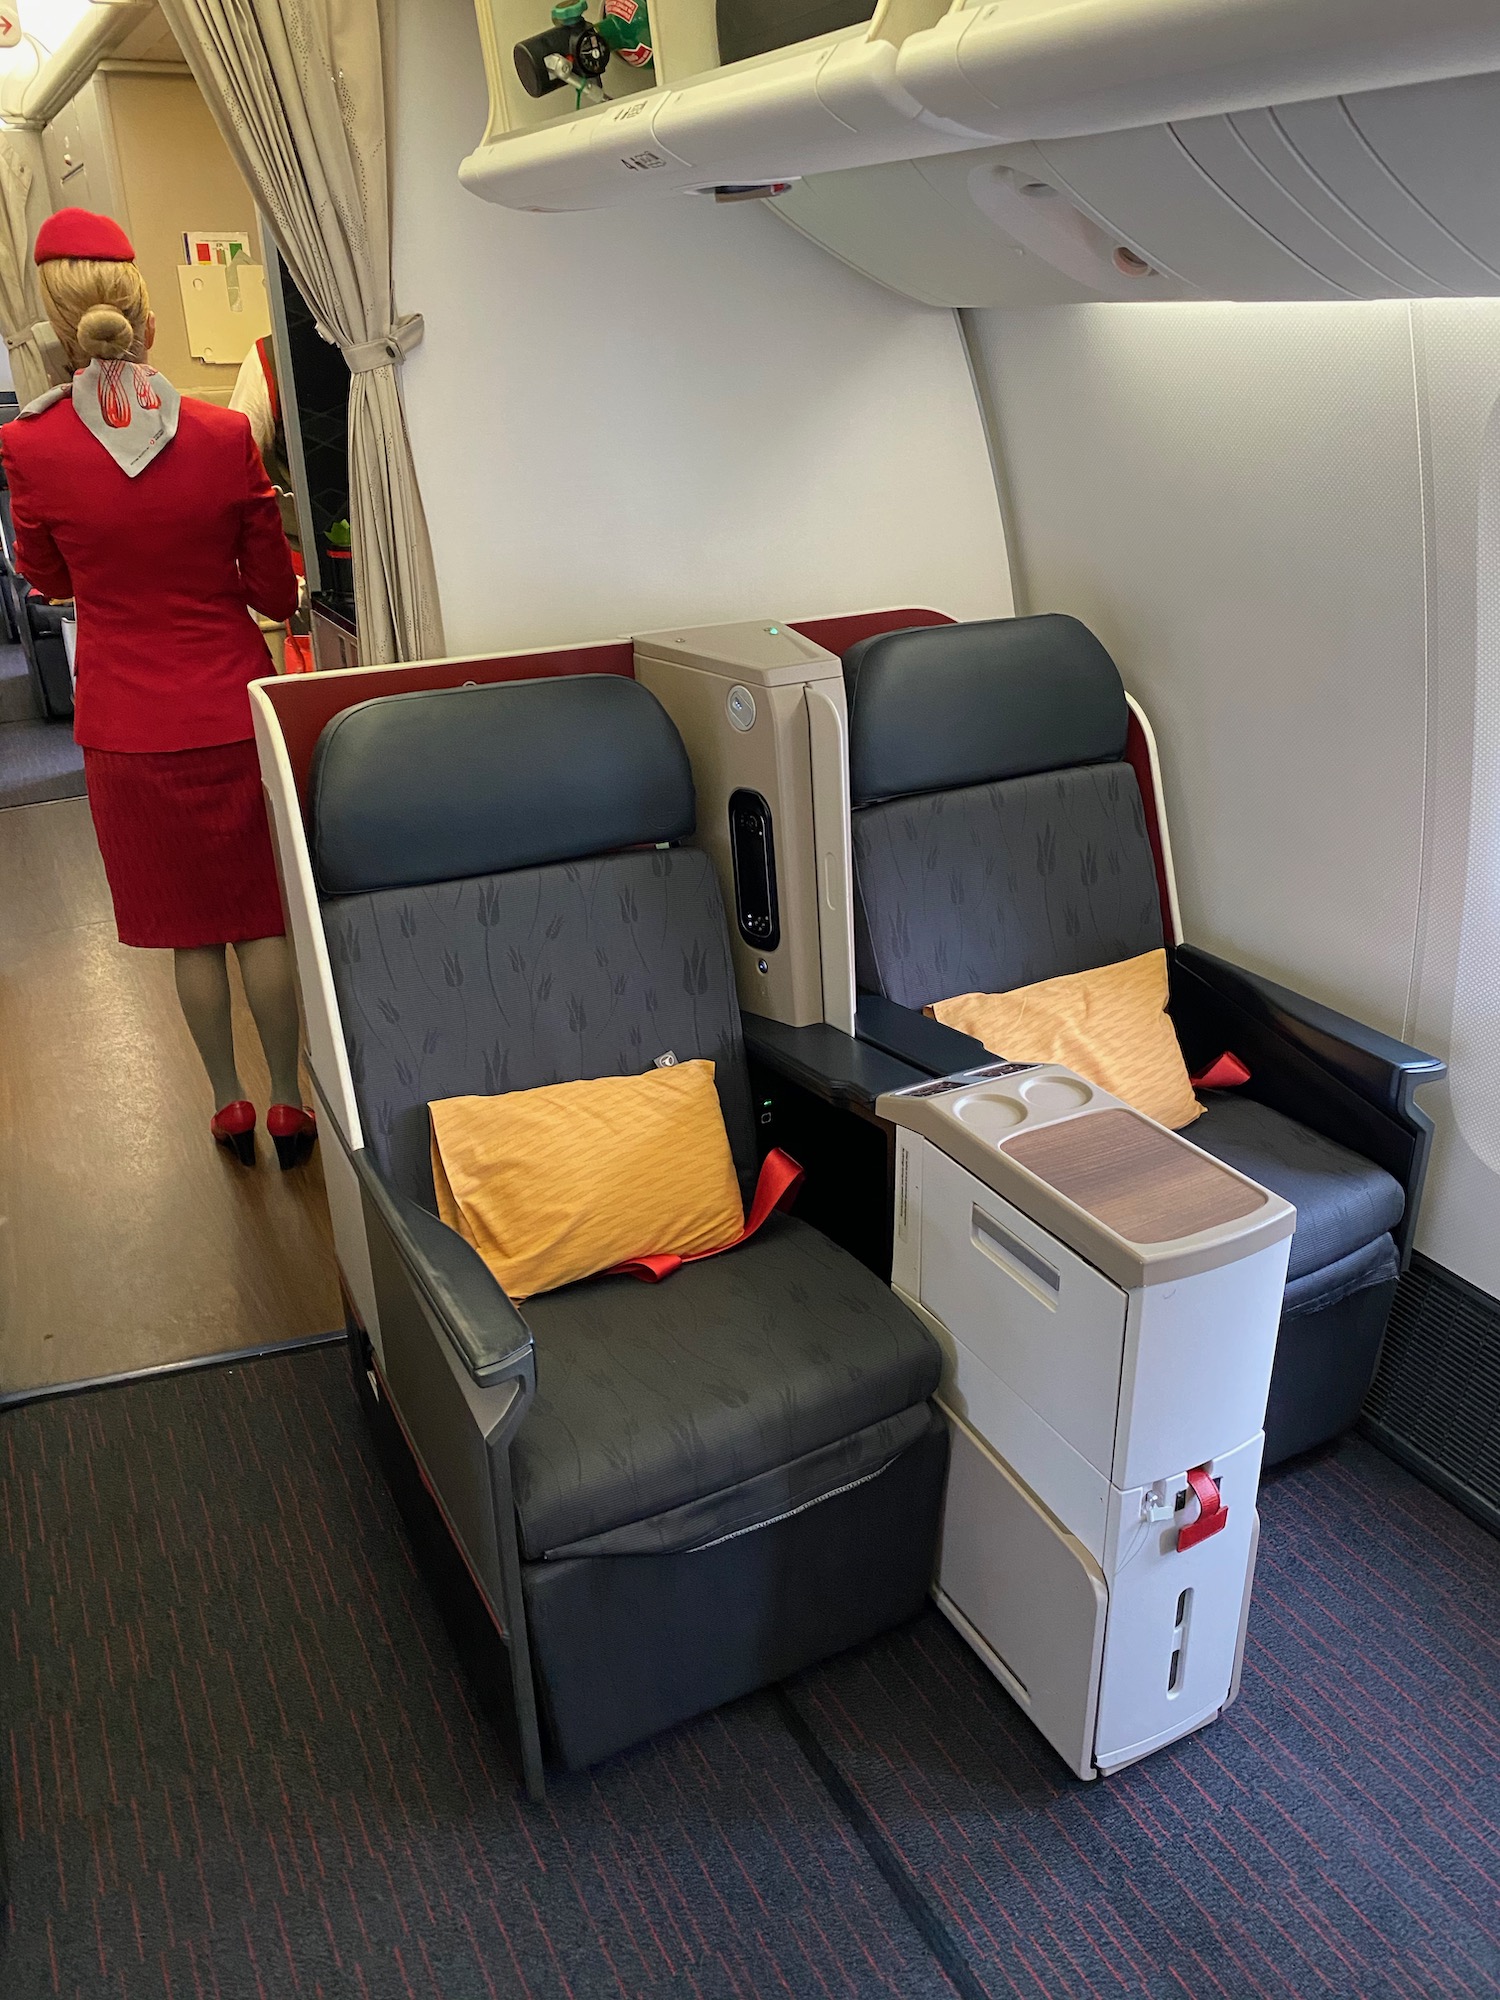 Review Turkish Airlines Business Class Live And Let S Fly